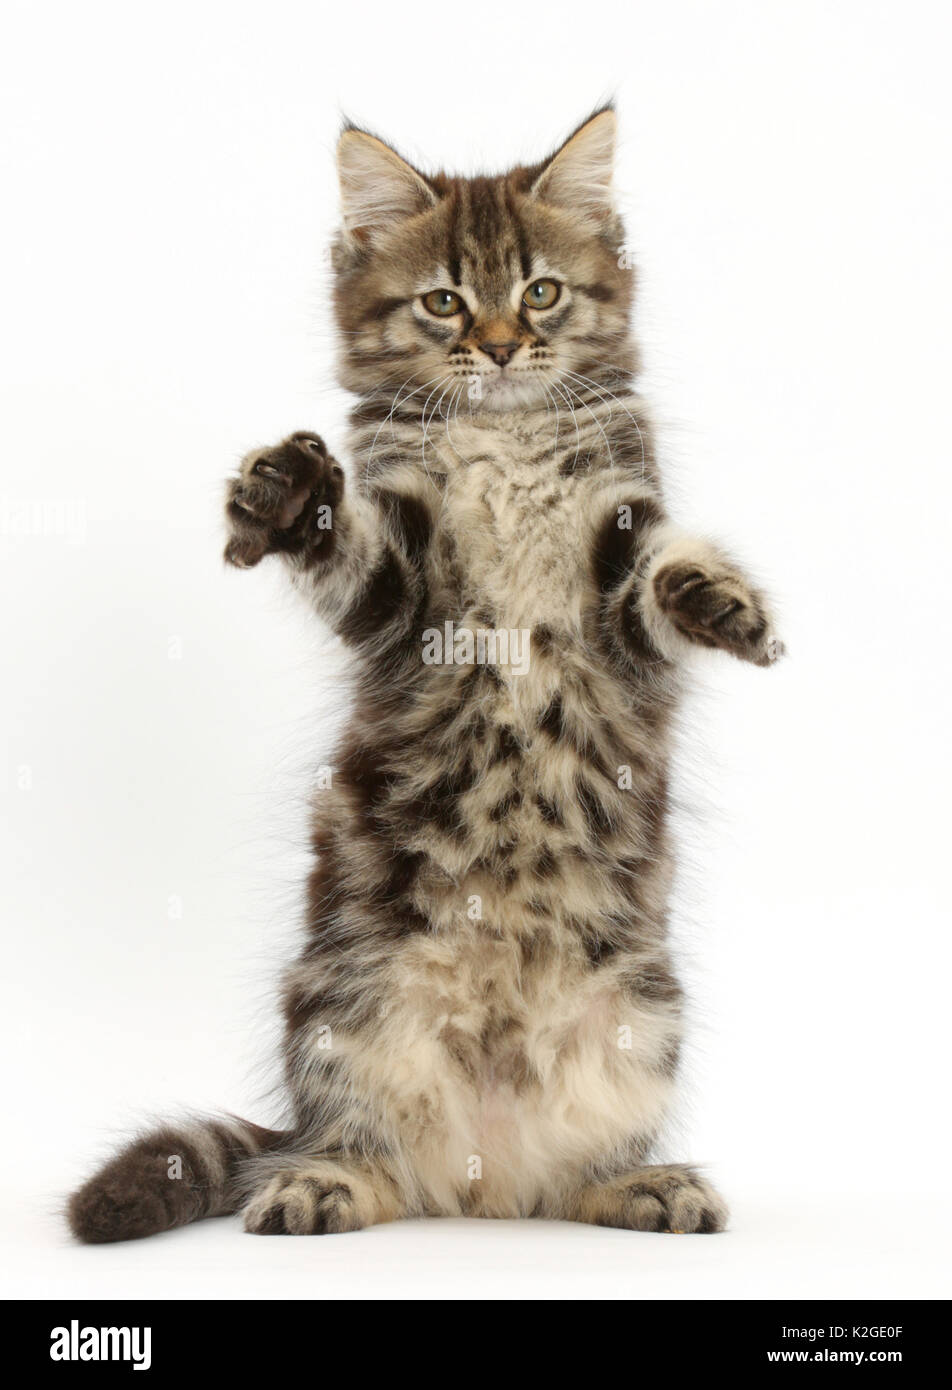 Tabby kitten on hind legs with paws out. Stock Photo